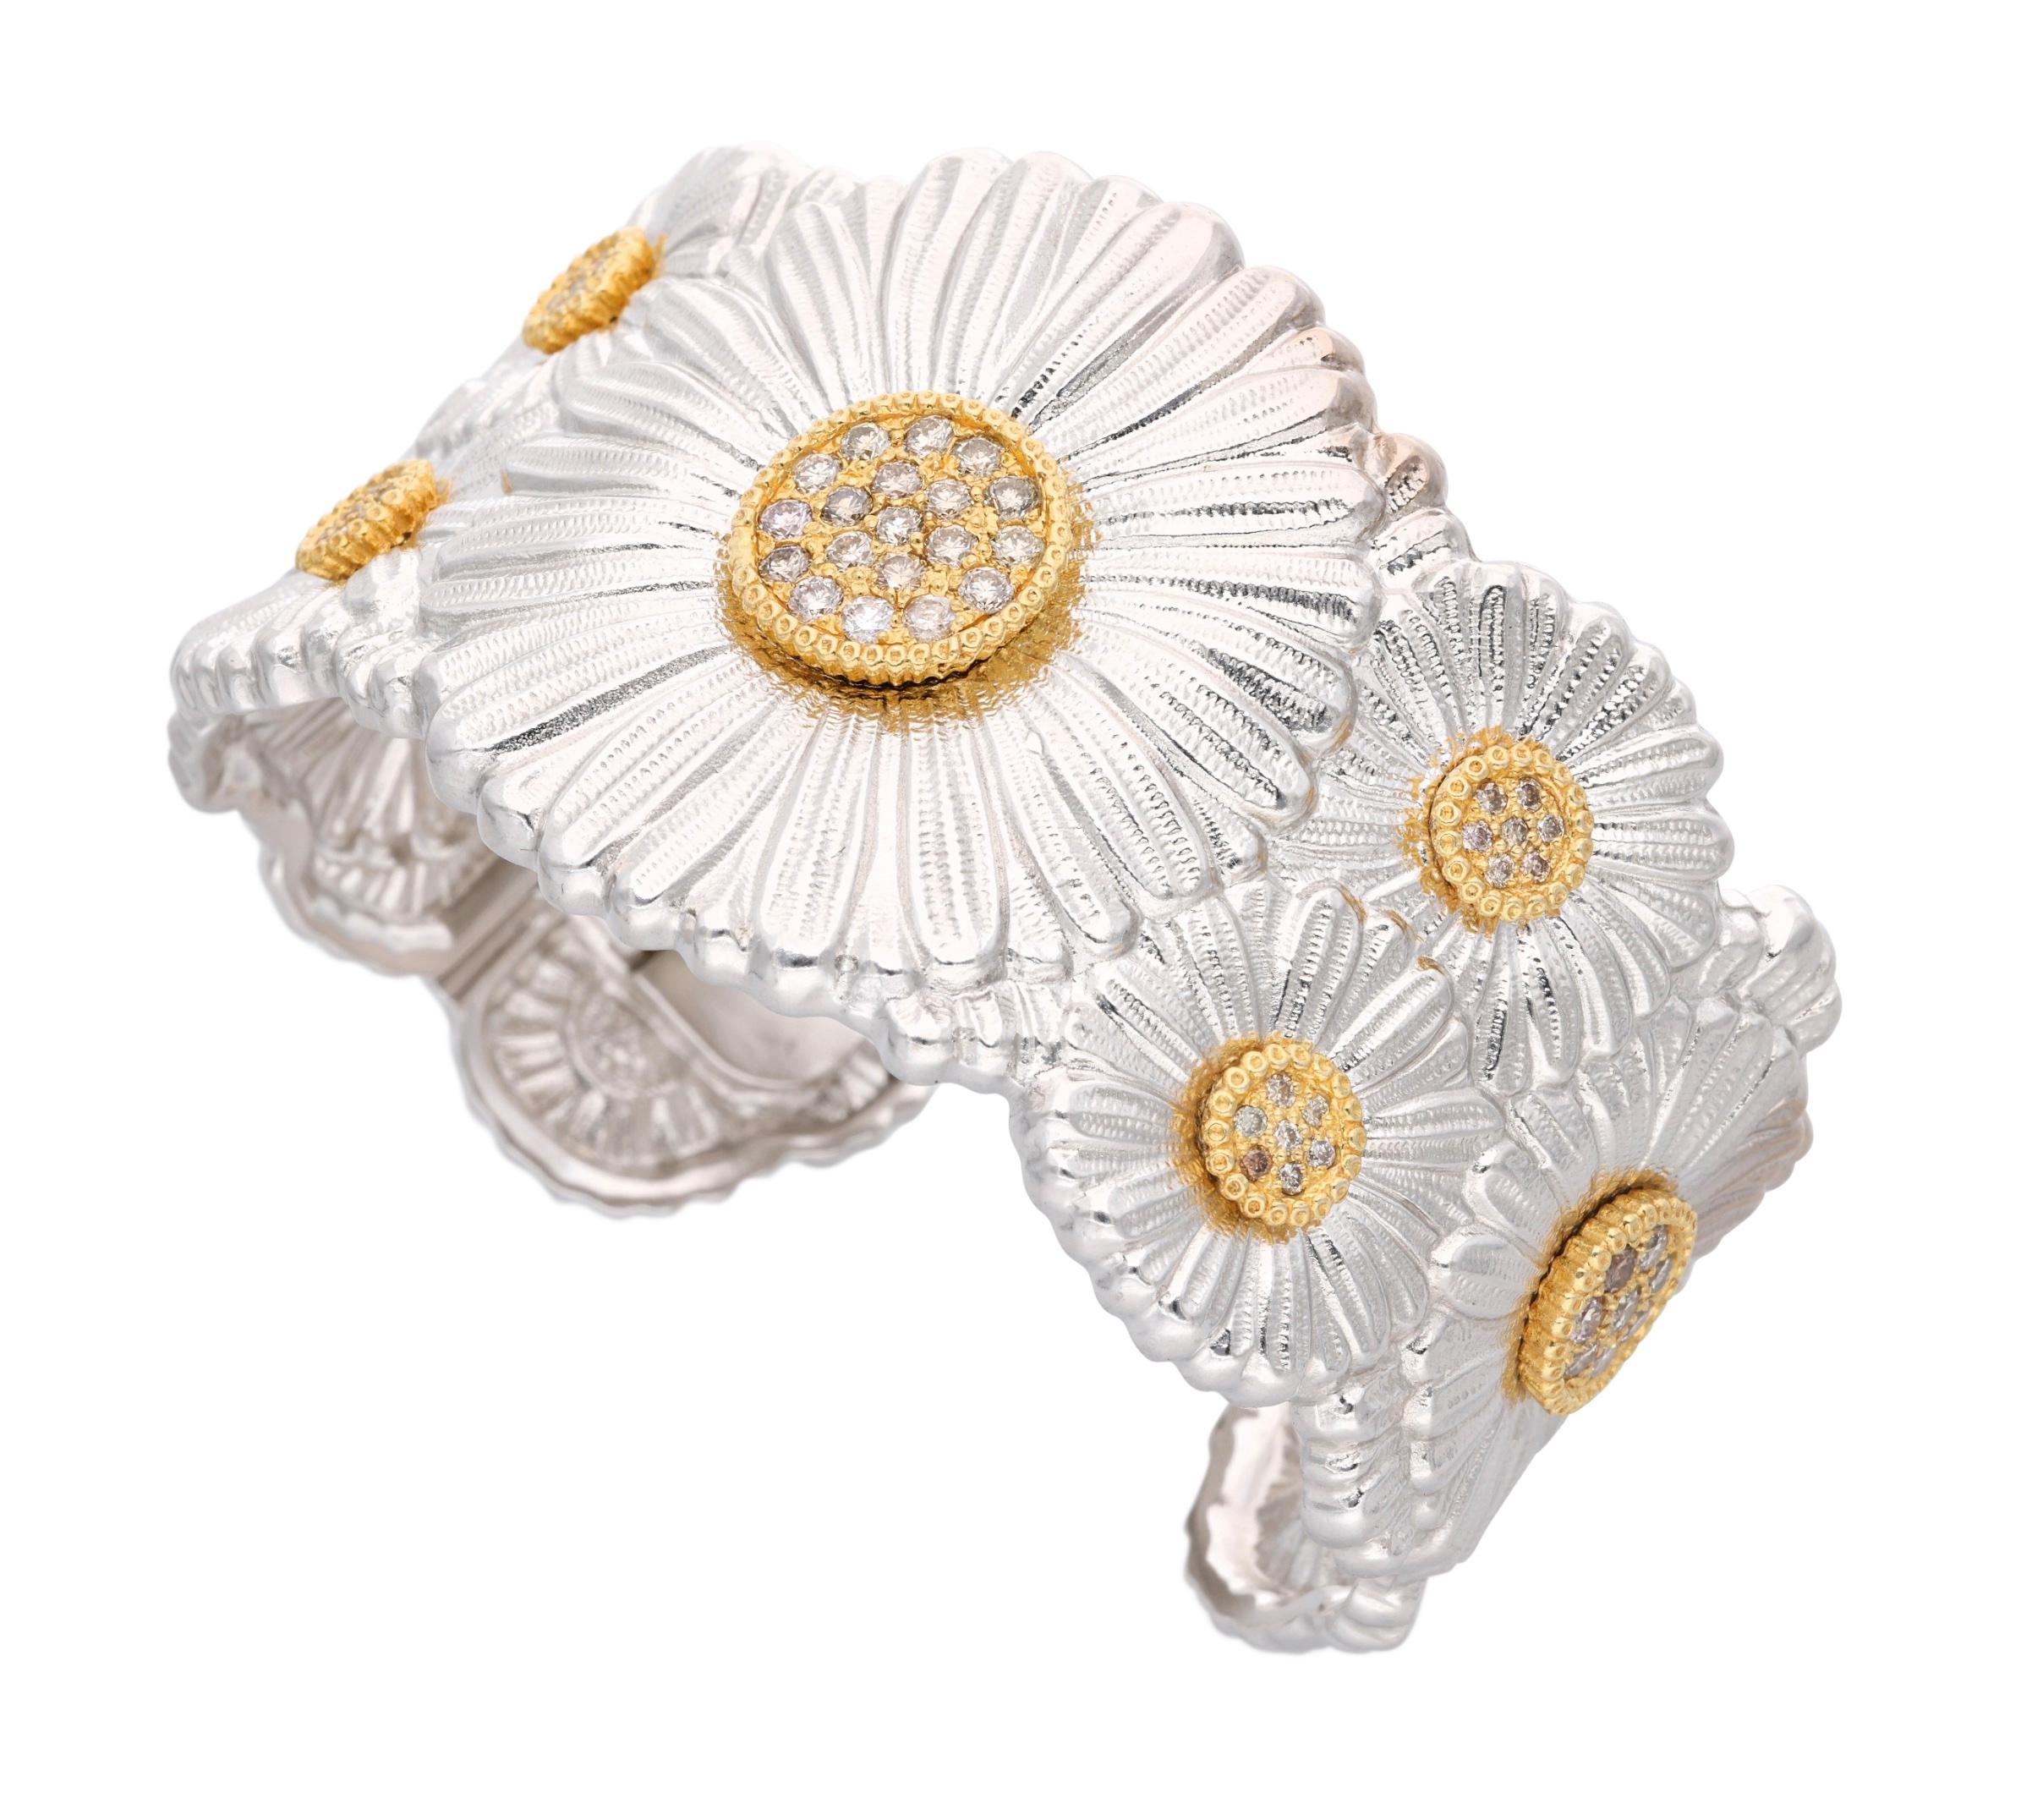 A Buccellati bangle designed with daisy flowers and accented with round diamonds.

- Round diamonds weigh a total of approximately 1.60 carats
- Signed Buccellati with serial number
- Signed Italy
- Sterling silver, vermeil
- Total weight 69.93